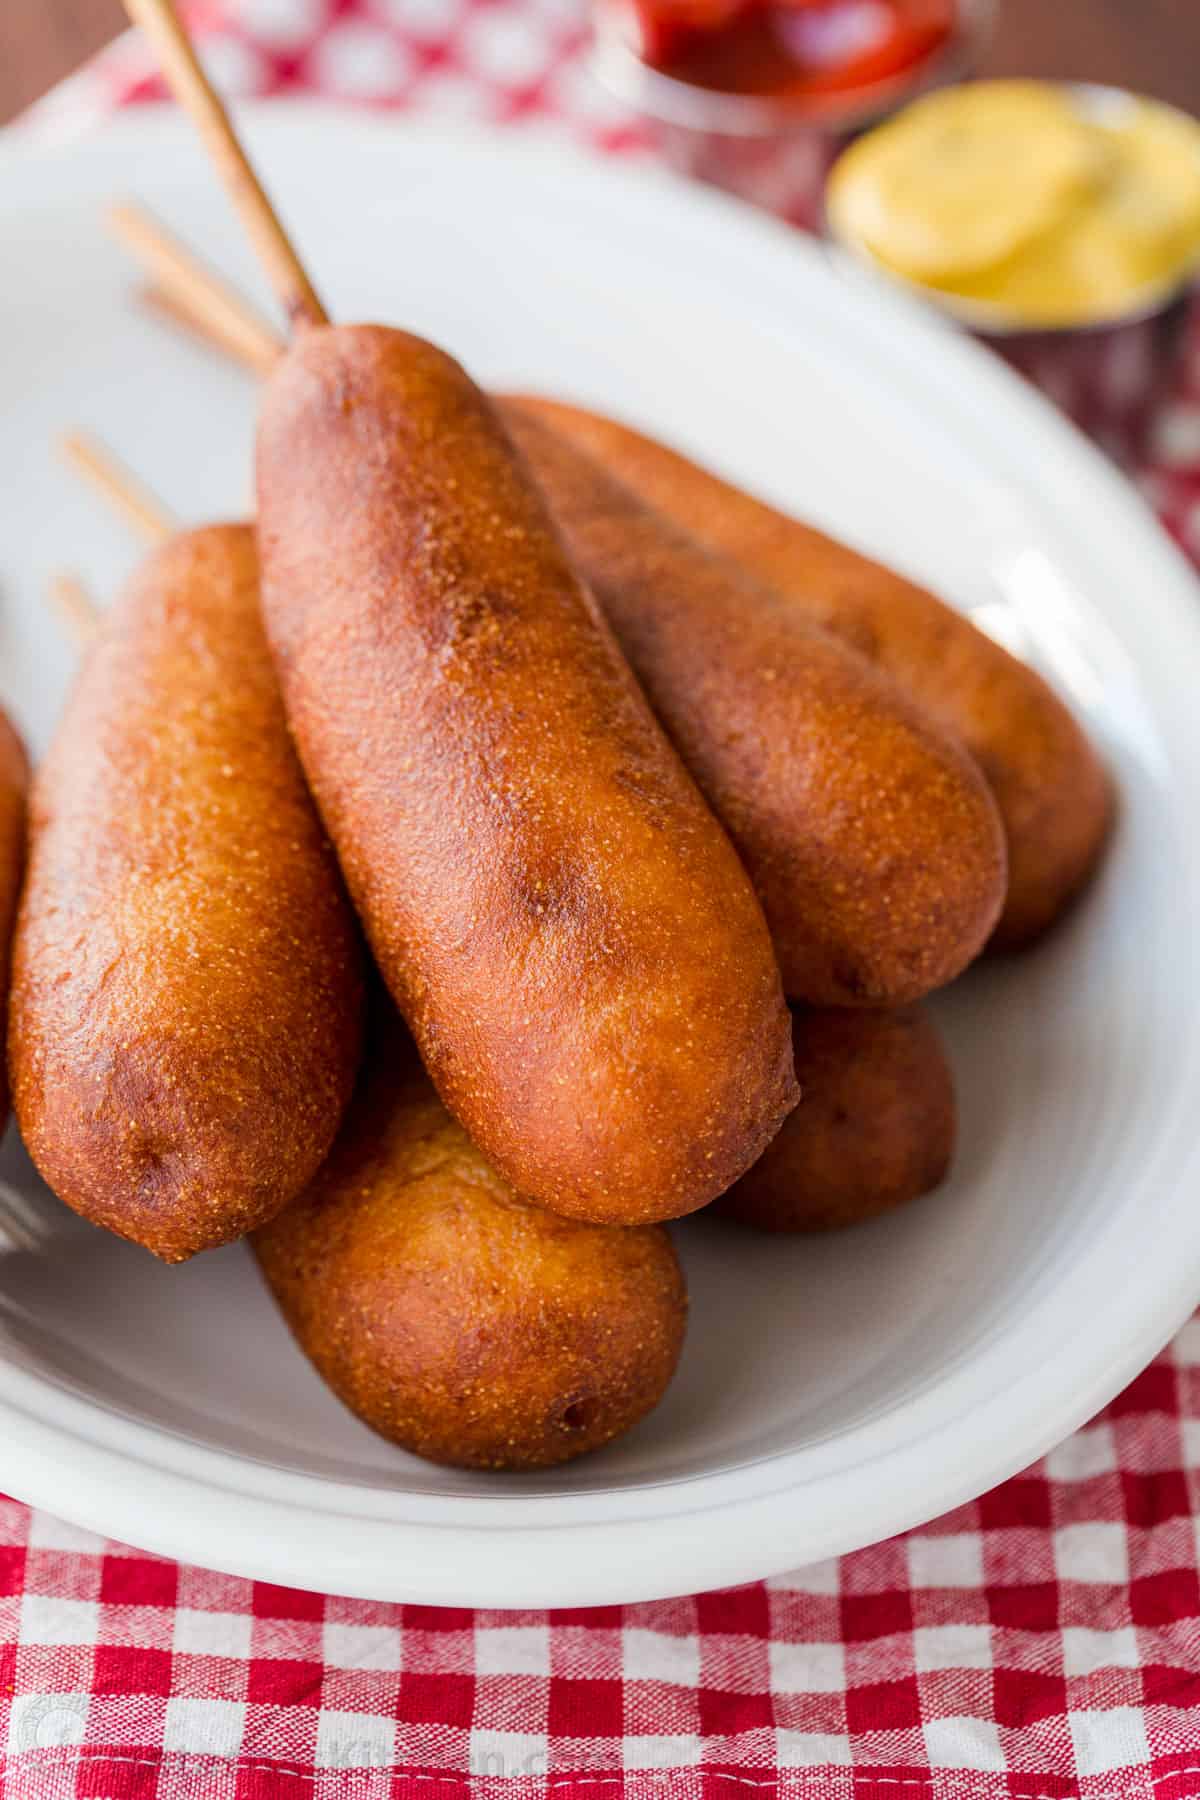 A pile of corn dogs on a white plate.